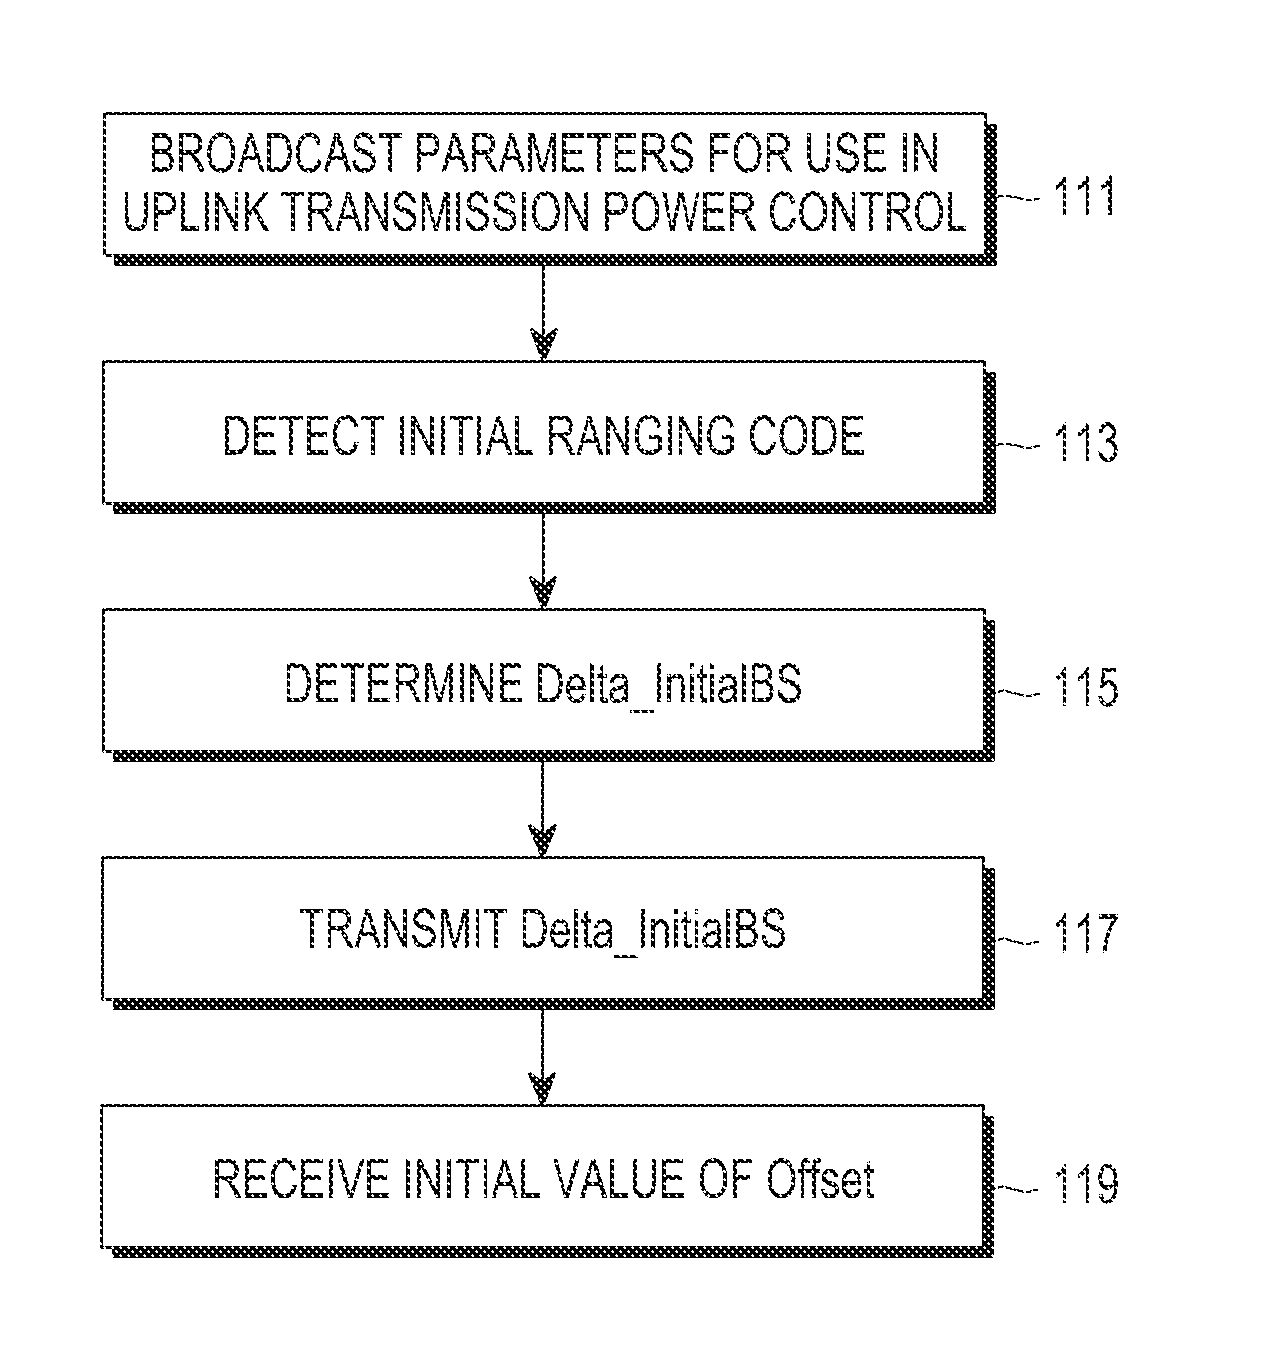 Apparatus and method for controlling uplink transmission power in a mobile communication system